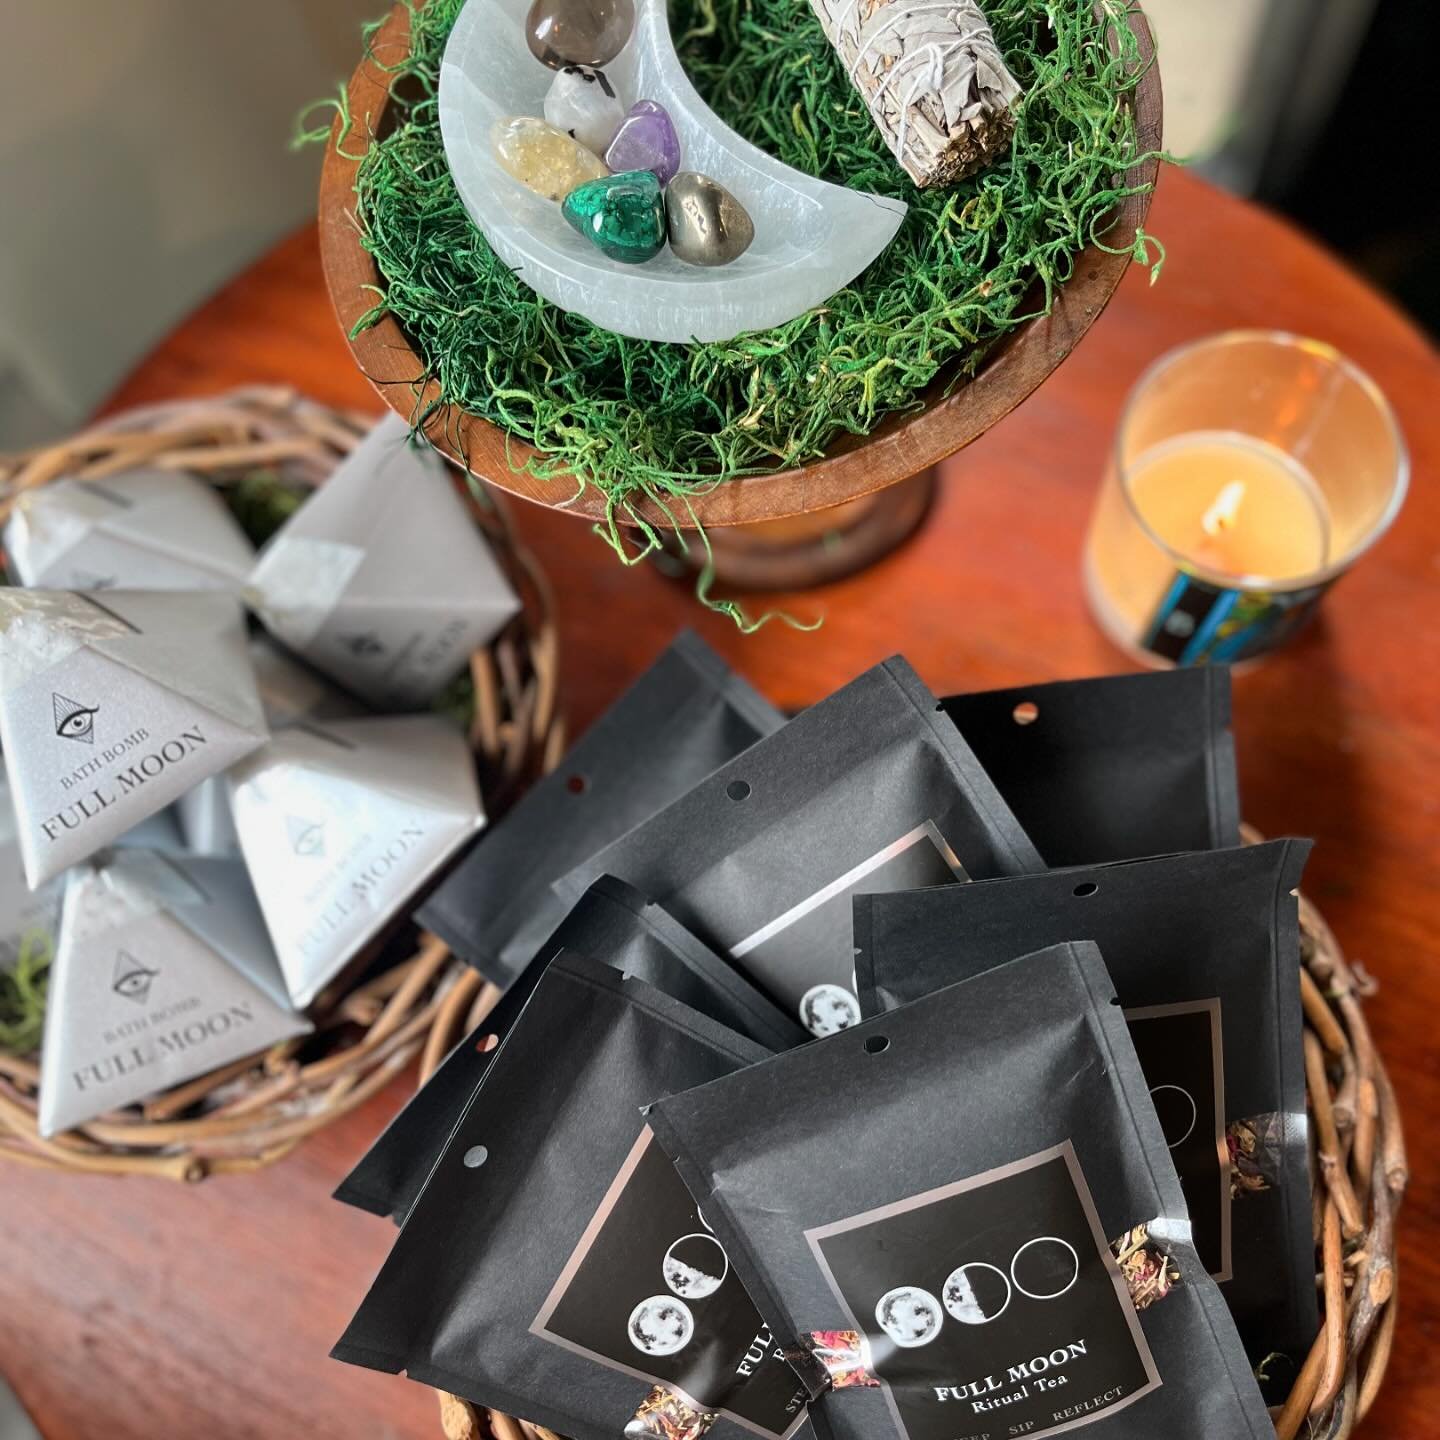 Check out the #linkinbio for our &ldquo;Beginner&rsquo;s Guide to Full Moon Rituals&rdquo; and snag all the full moon products you need for your rituals in our online shop! 

(Shipping is still FREE until May 31st!!) 

#fullmoon #moon #moonchild #moo